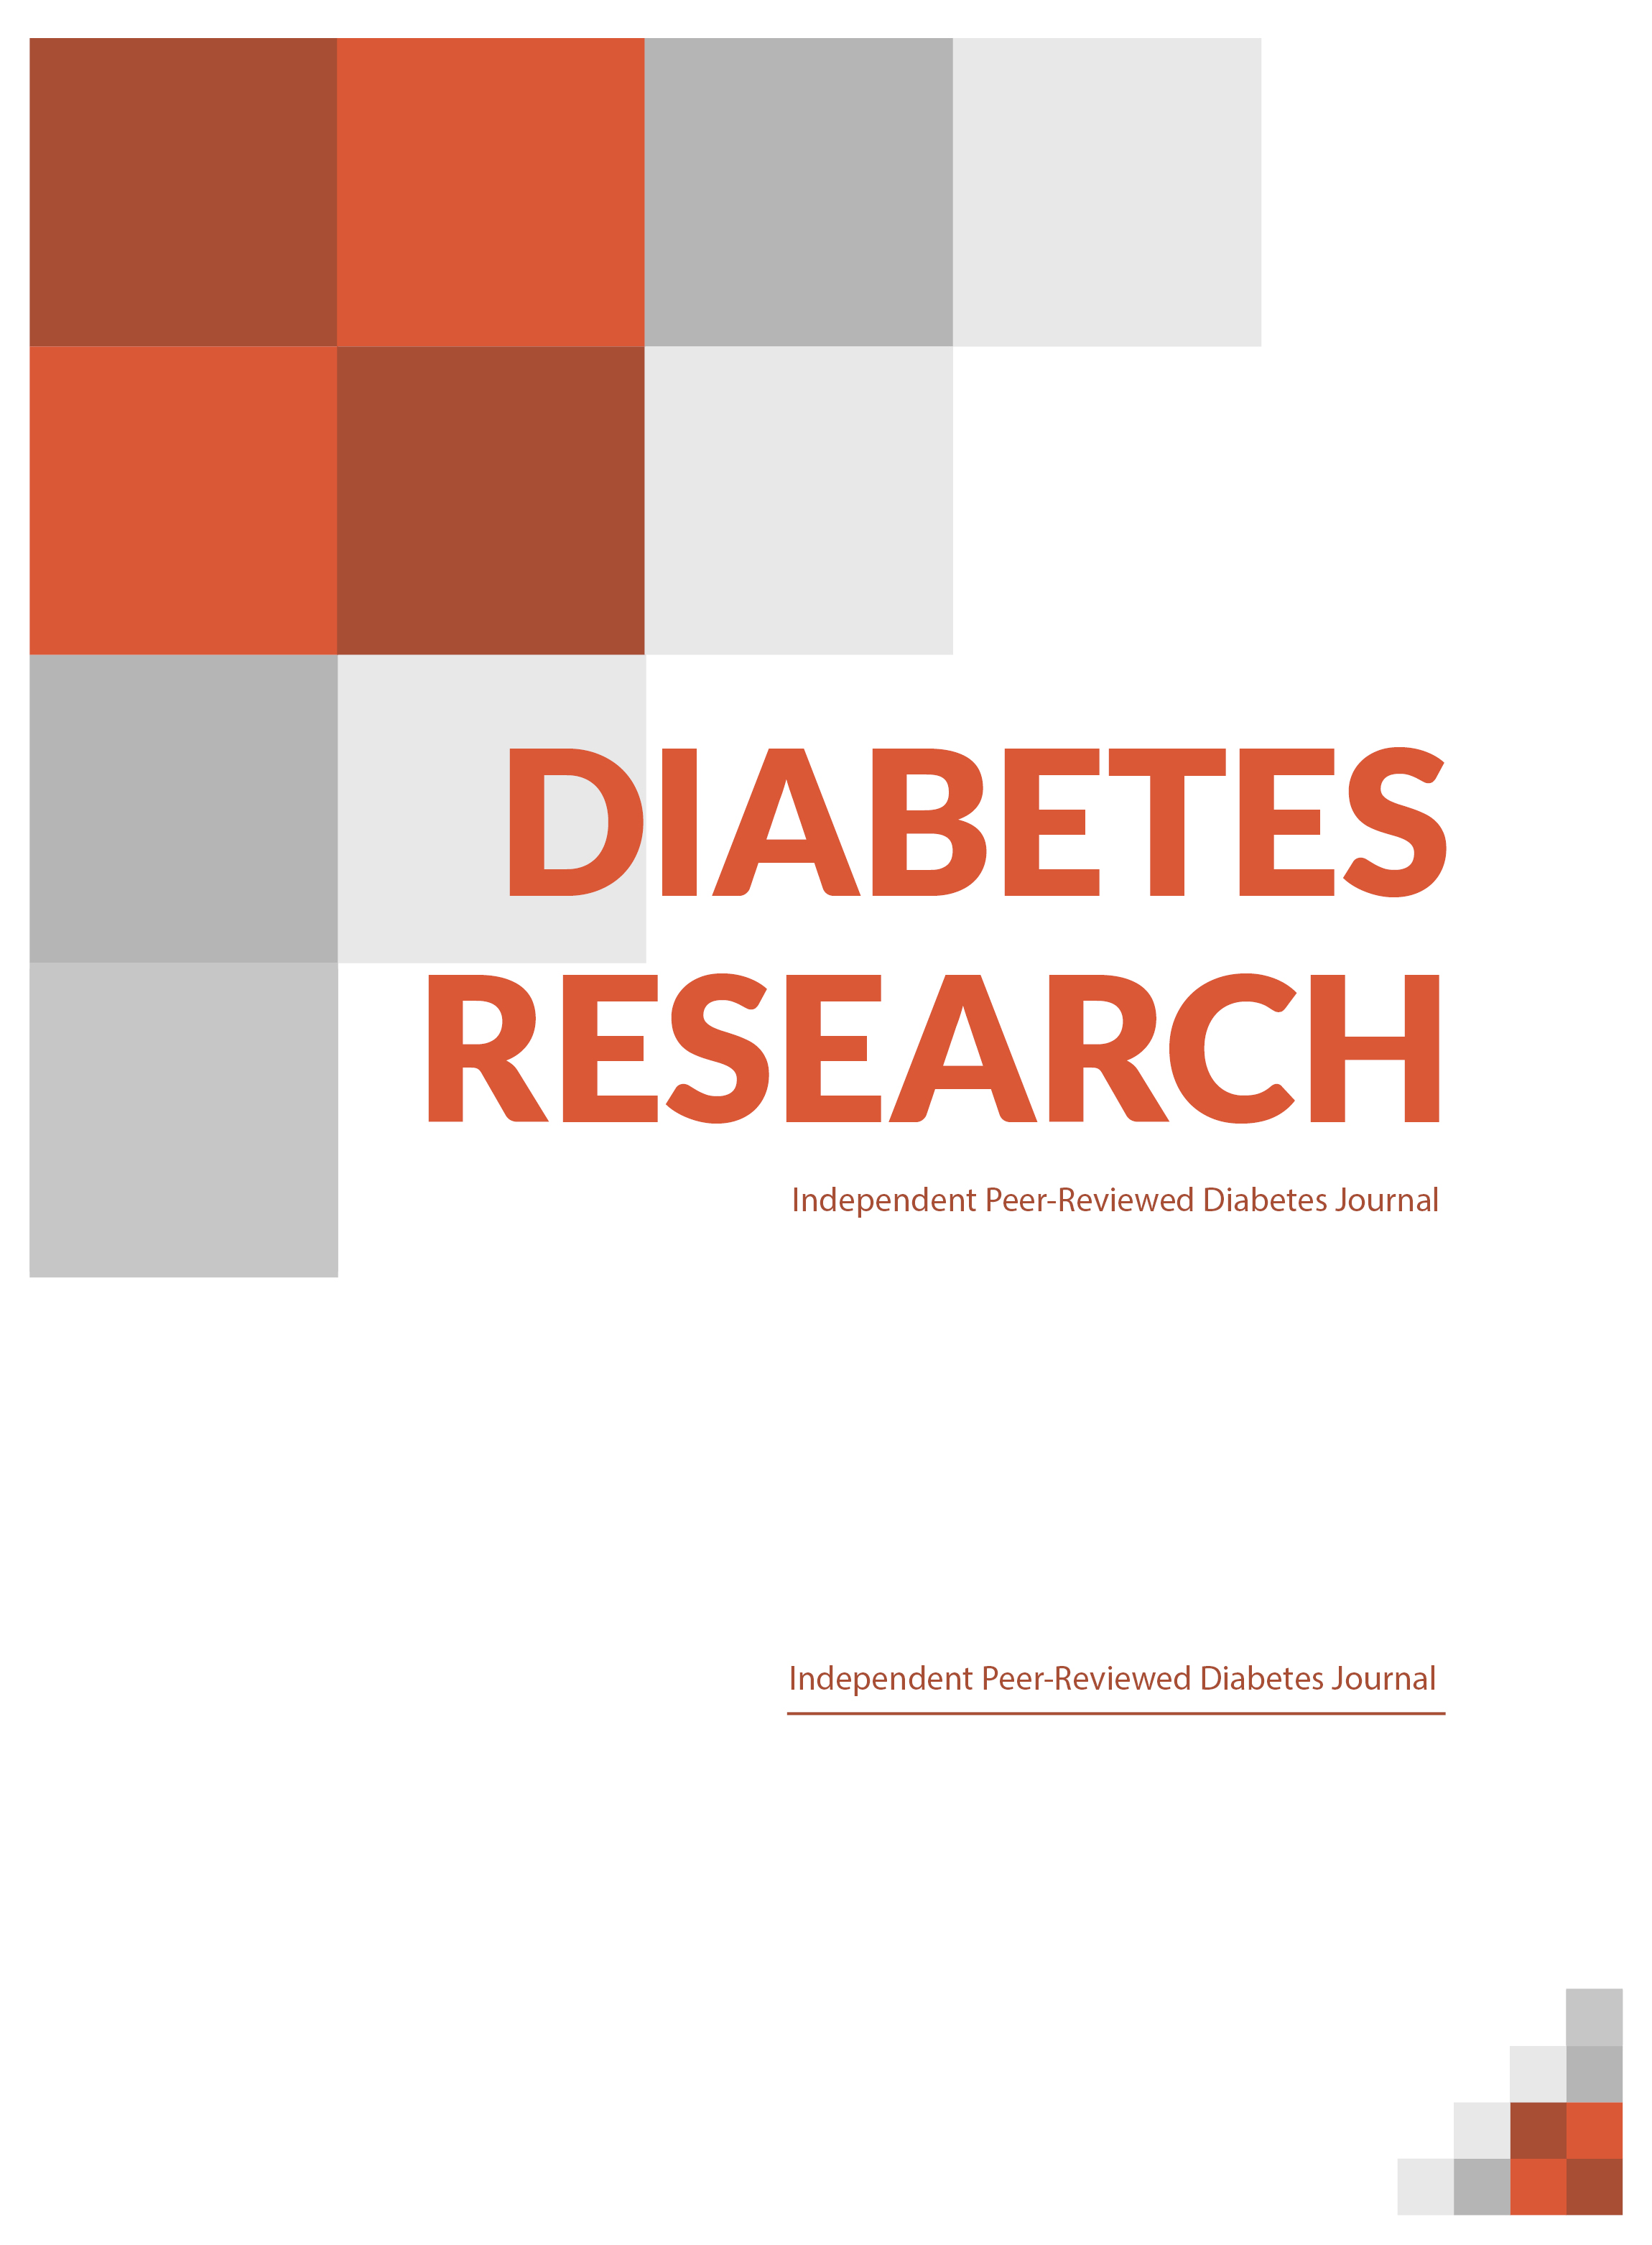 research articles on types of diabetes